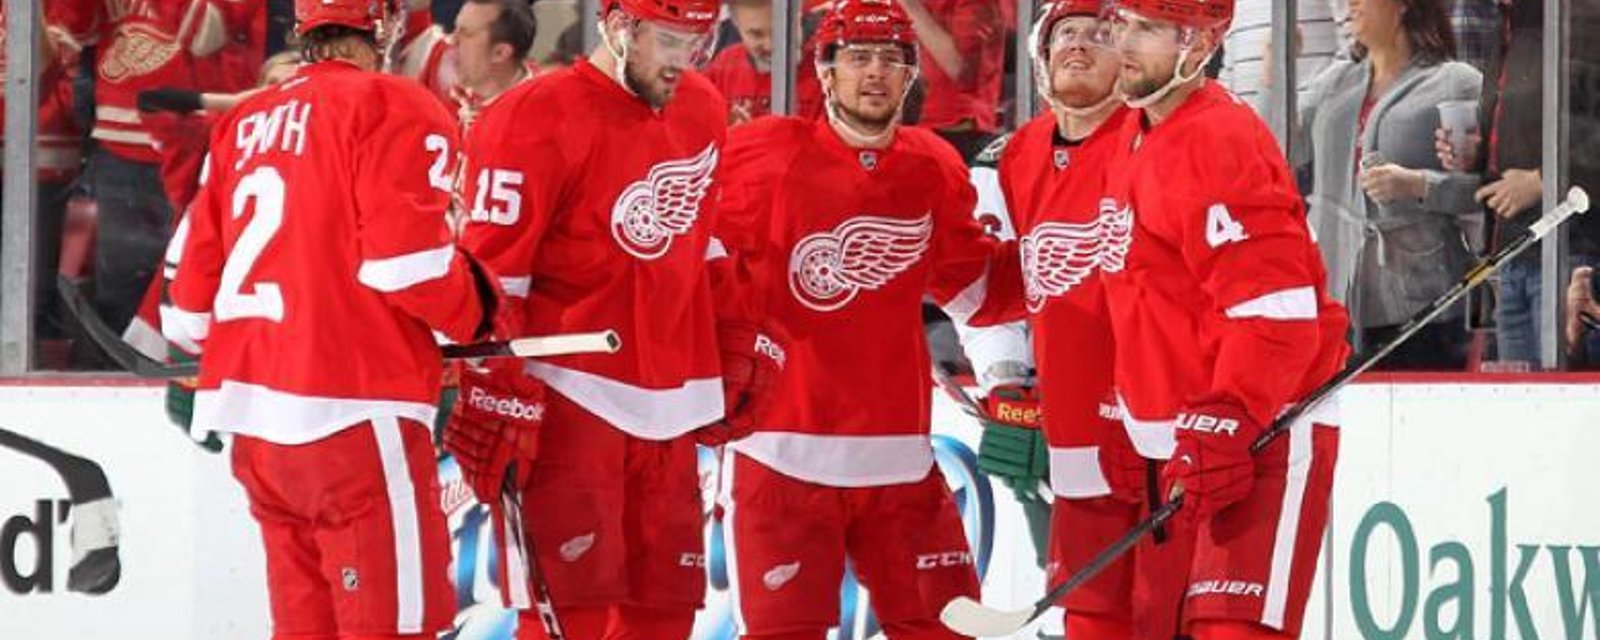 Red Wings rookie told he has made the team in interesting fashion